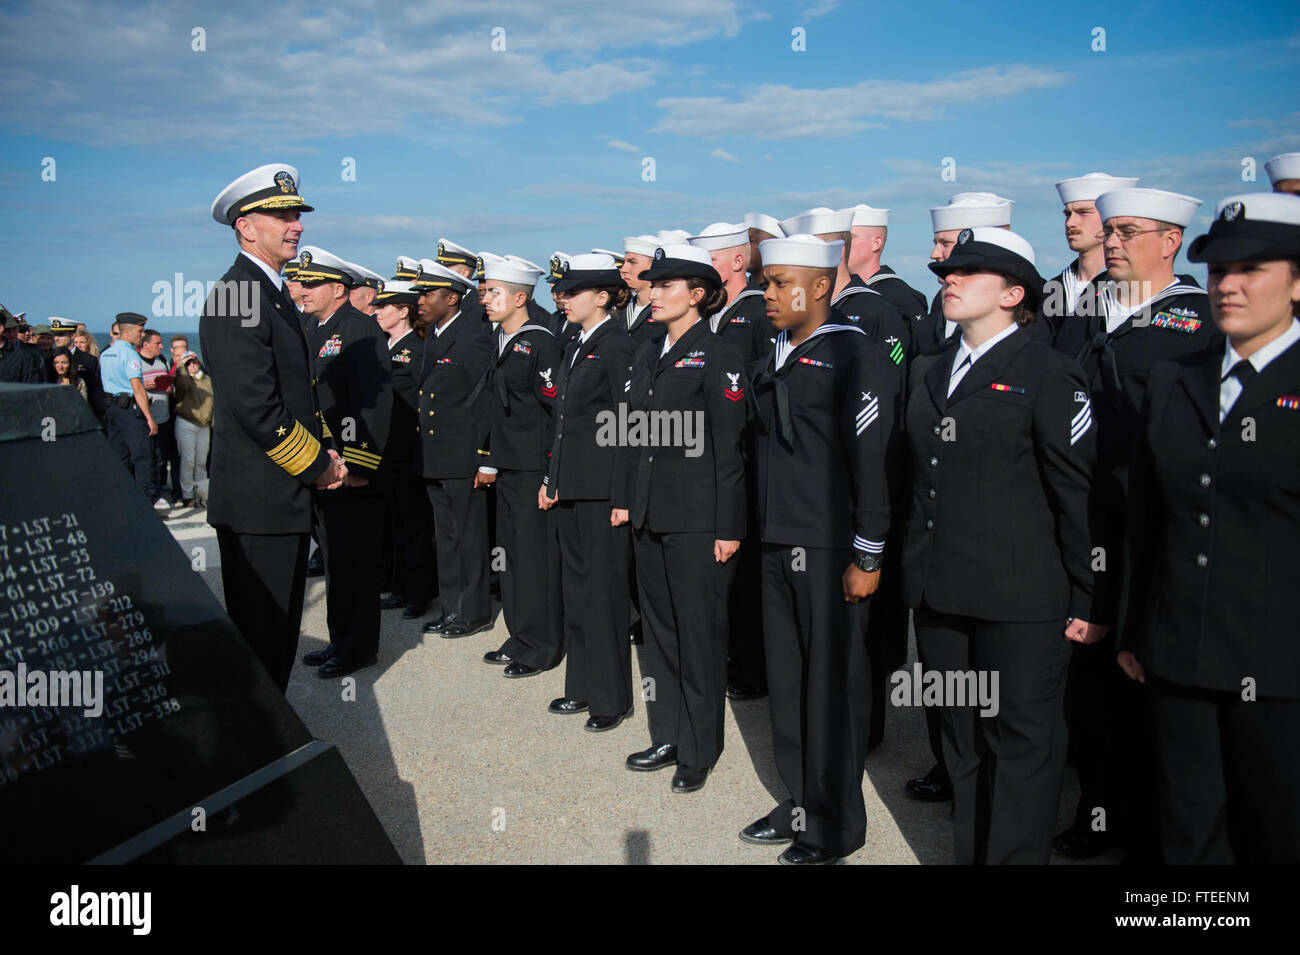 140605-N-YO152-146 UTAH BEACH, France (June 5, 2014) - Chief of Naval Operations, Adm. Jonathan Greenert, addresses Sailors assigned to the guided-missile destroyer USS Oscar Austin (DDG 79) prior to a D-Day ceremony at the Navy Memorial on Utah Beach. The event was one of several commemorations of the 70th Anniversary of D-Day operations conducted by Allied forces World War II June 5-6, 1944. Over 650 U.S. military personnel have joined troops from several NATO nations to participate in ceremonies to honor the events at the invitation of the French government. (U.S. Navy photo by Mass Communi Stock Photo